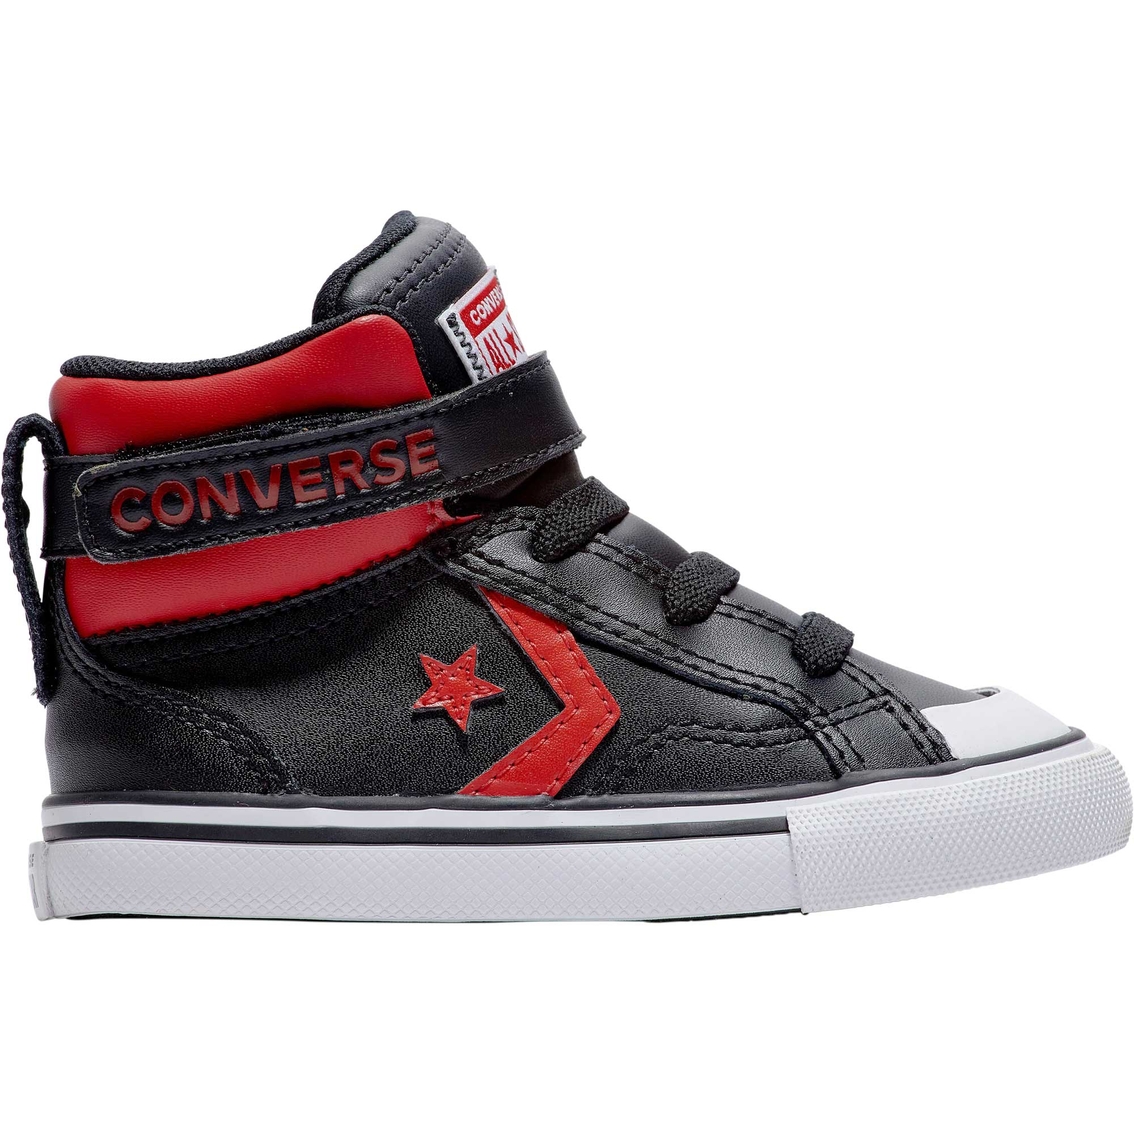 [Schnellstes neuestes Modell 2024! ! ] Converse Infant Sneakers Varsity | Pro Boys The | Top High Blaze | Exchange Shop Strap Color Shoes